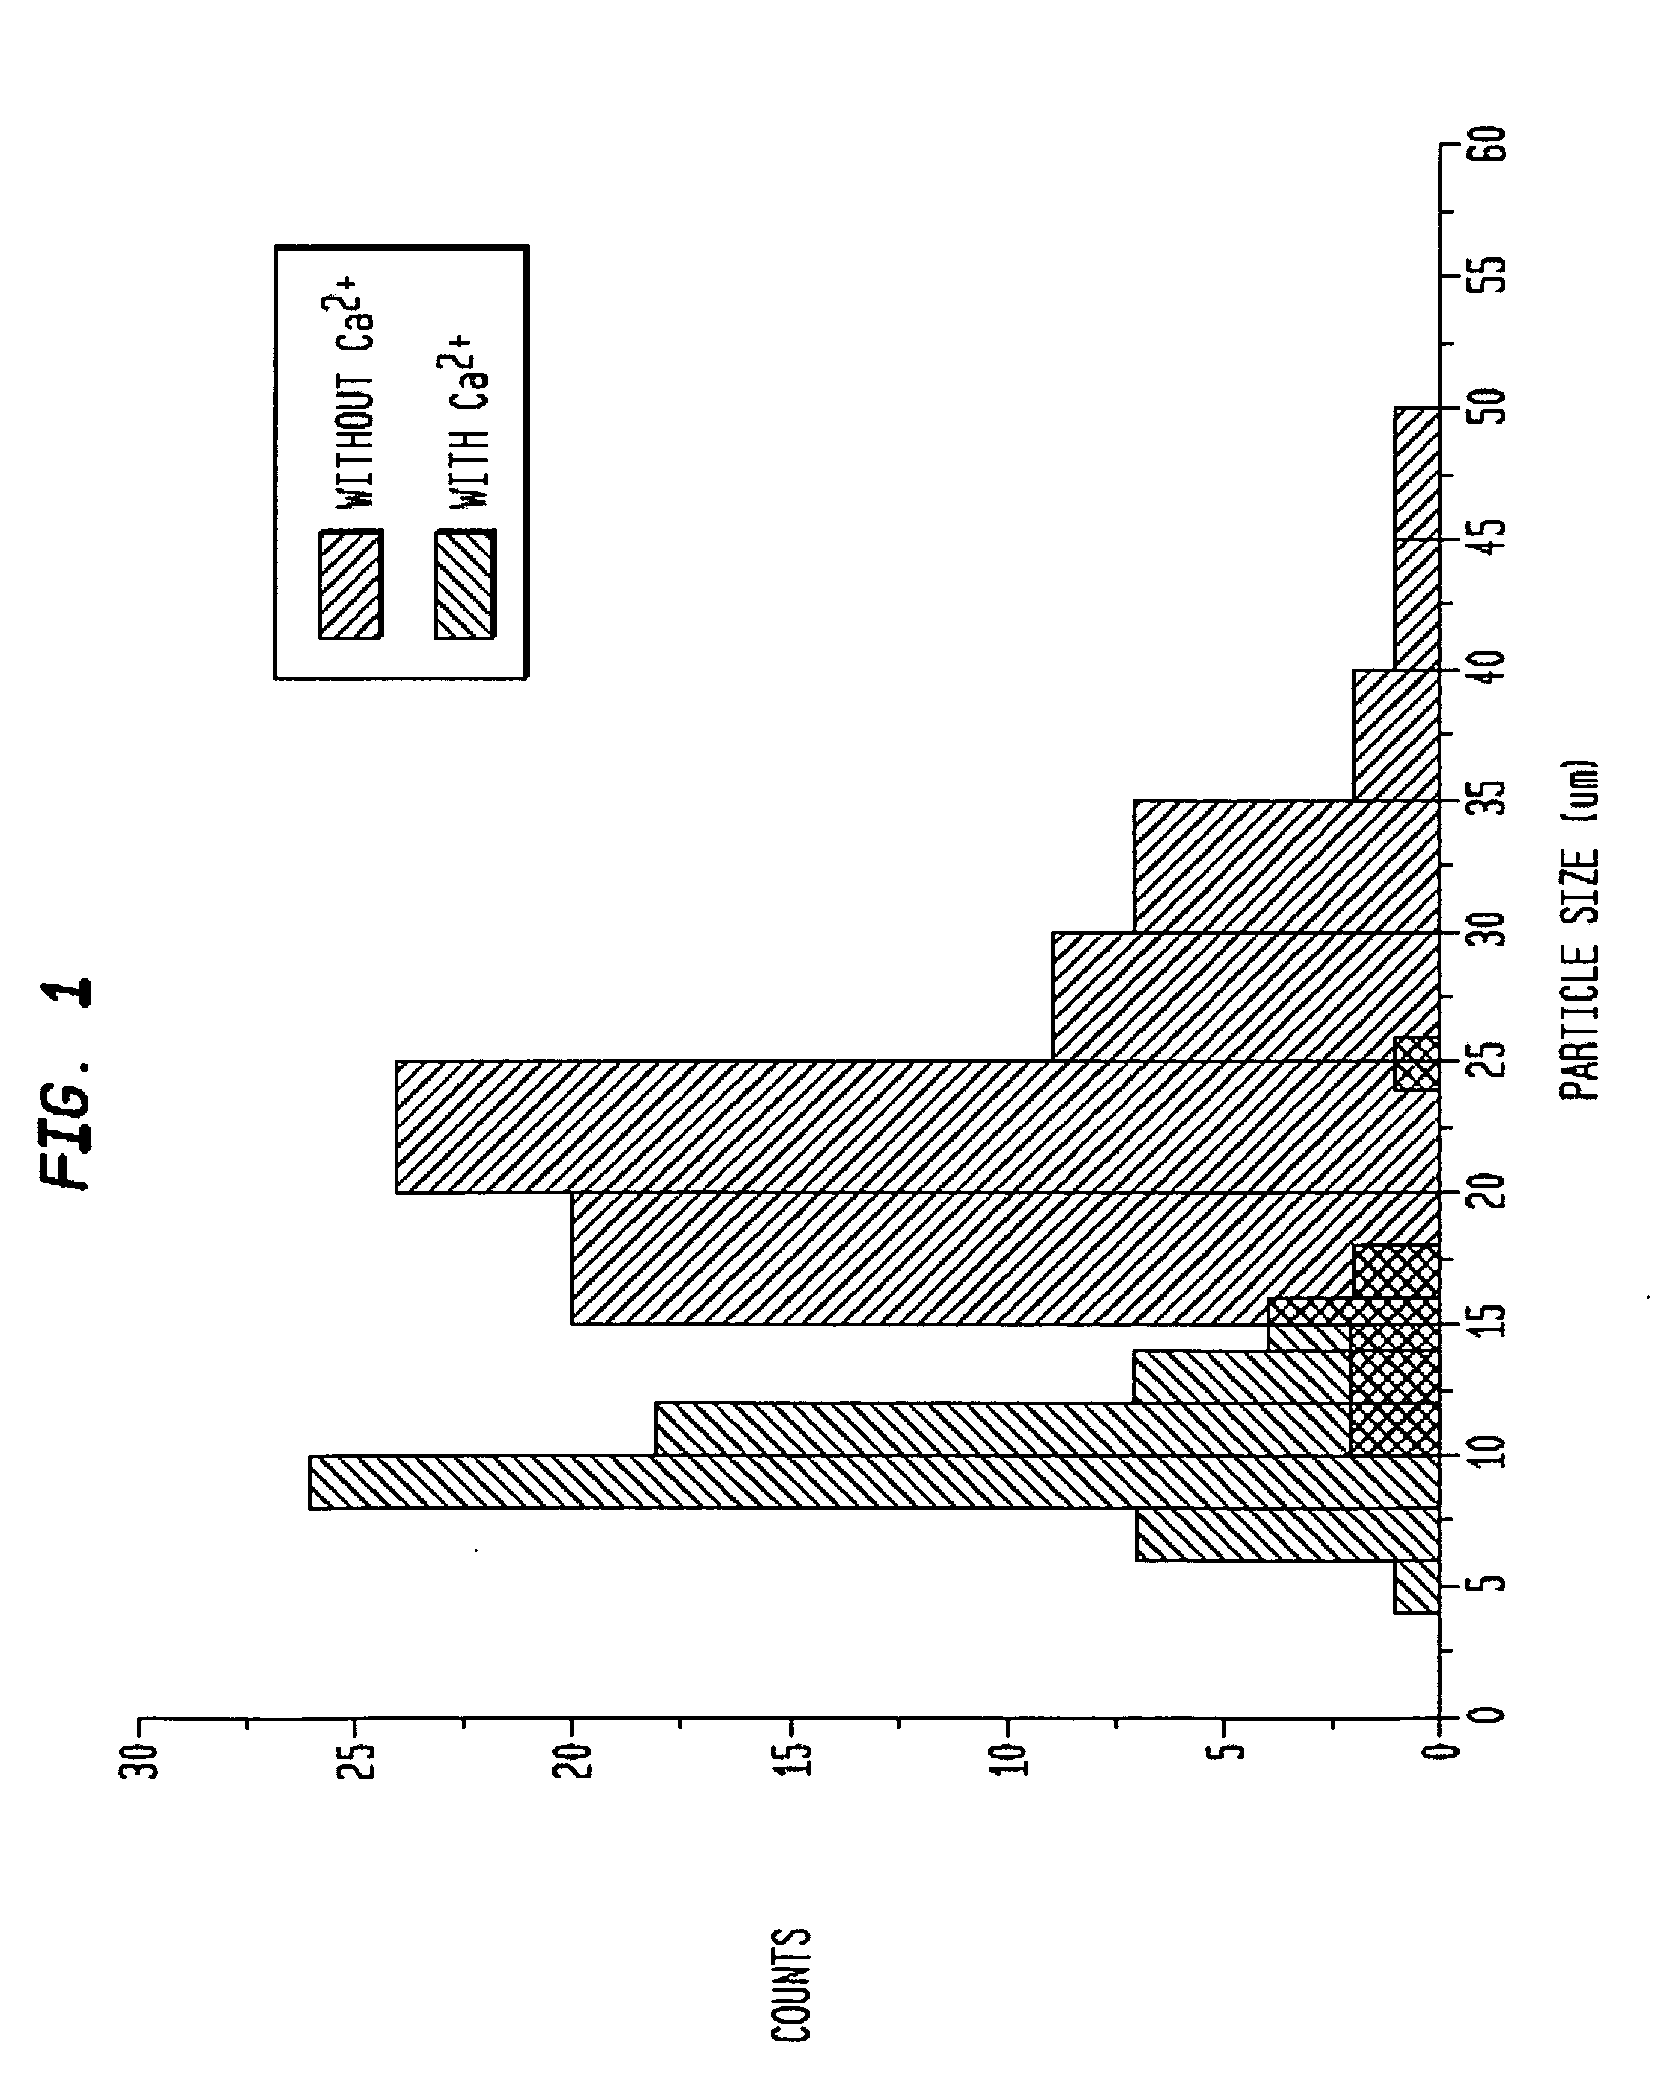 Self-situating stimuli-responsive polymer compositions in soil additives and methods for use